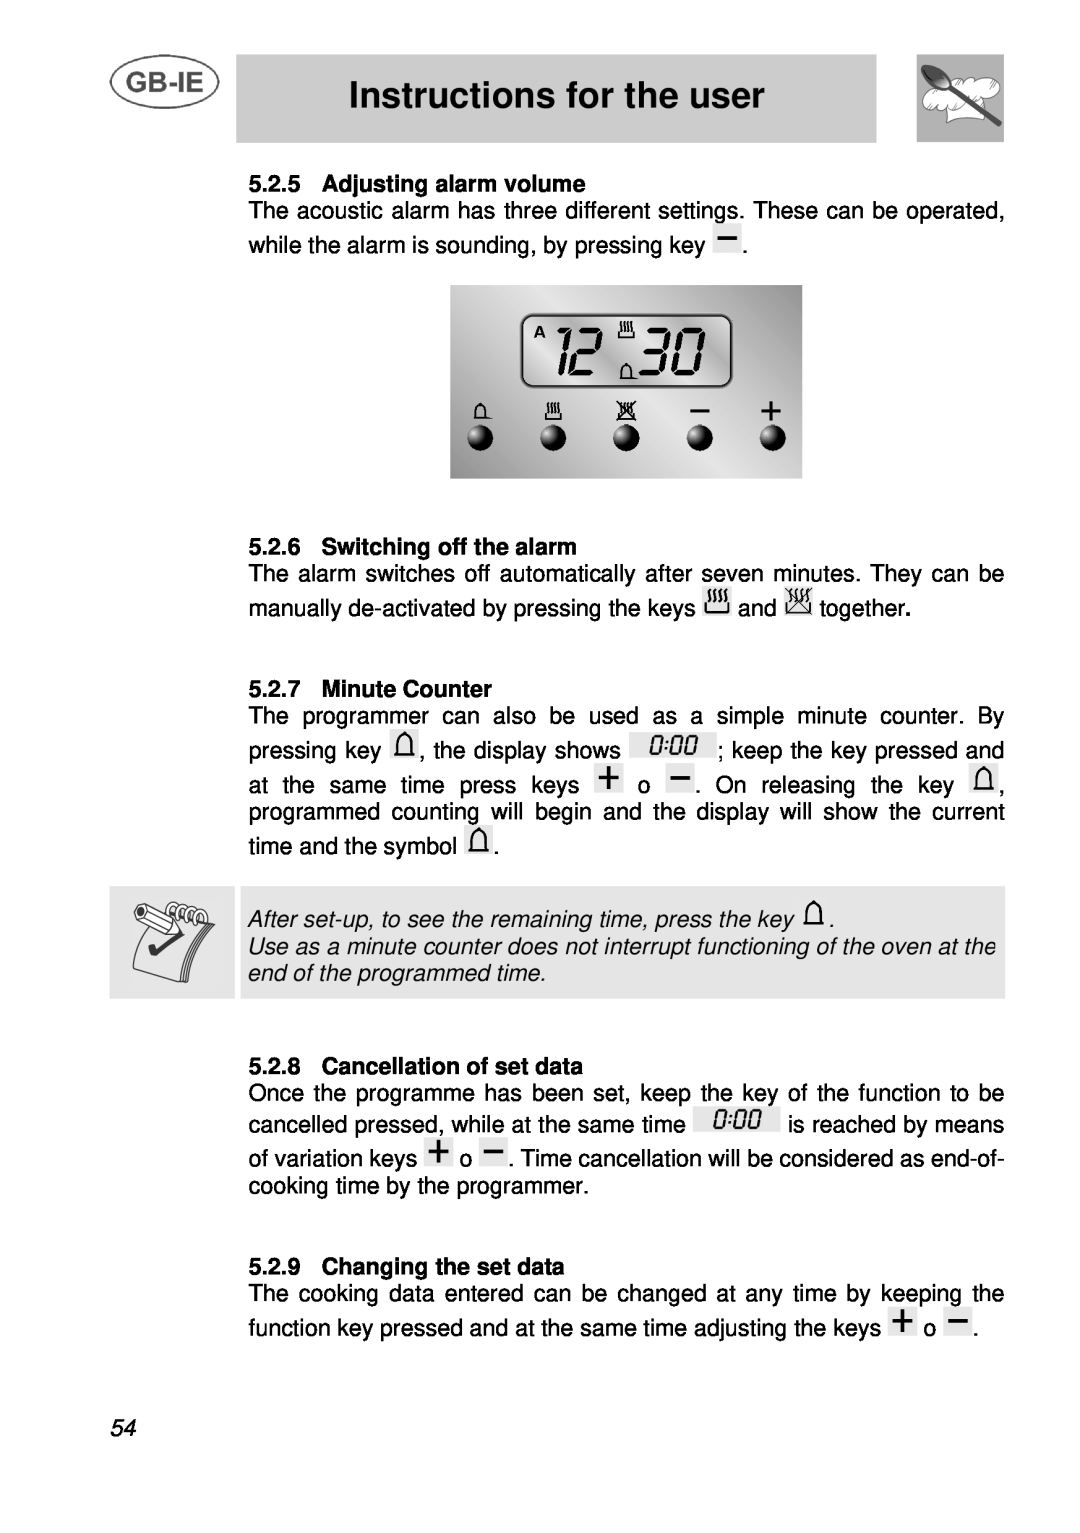 Smeg A3 Instructions for the user, Adjusting alarm volume, Switching off the alarm, Minute Counter, Changing the set data 